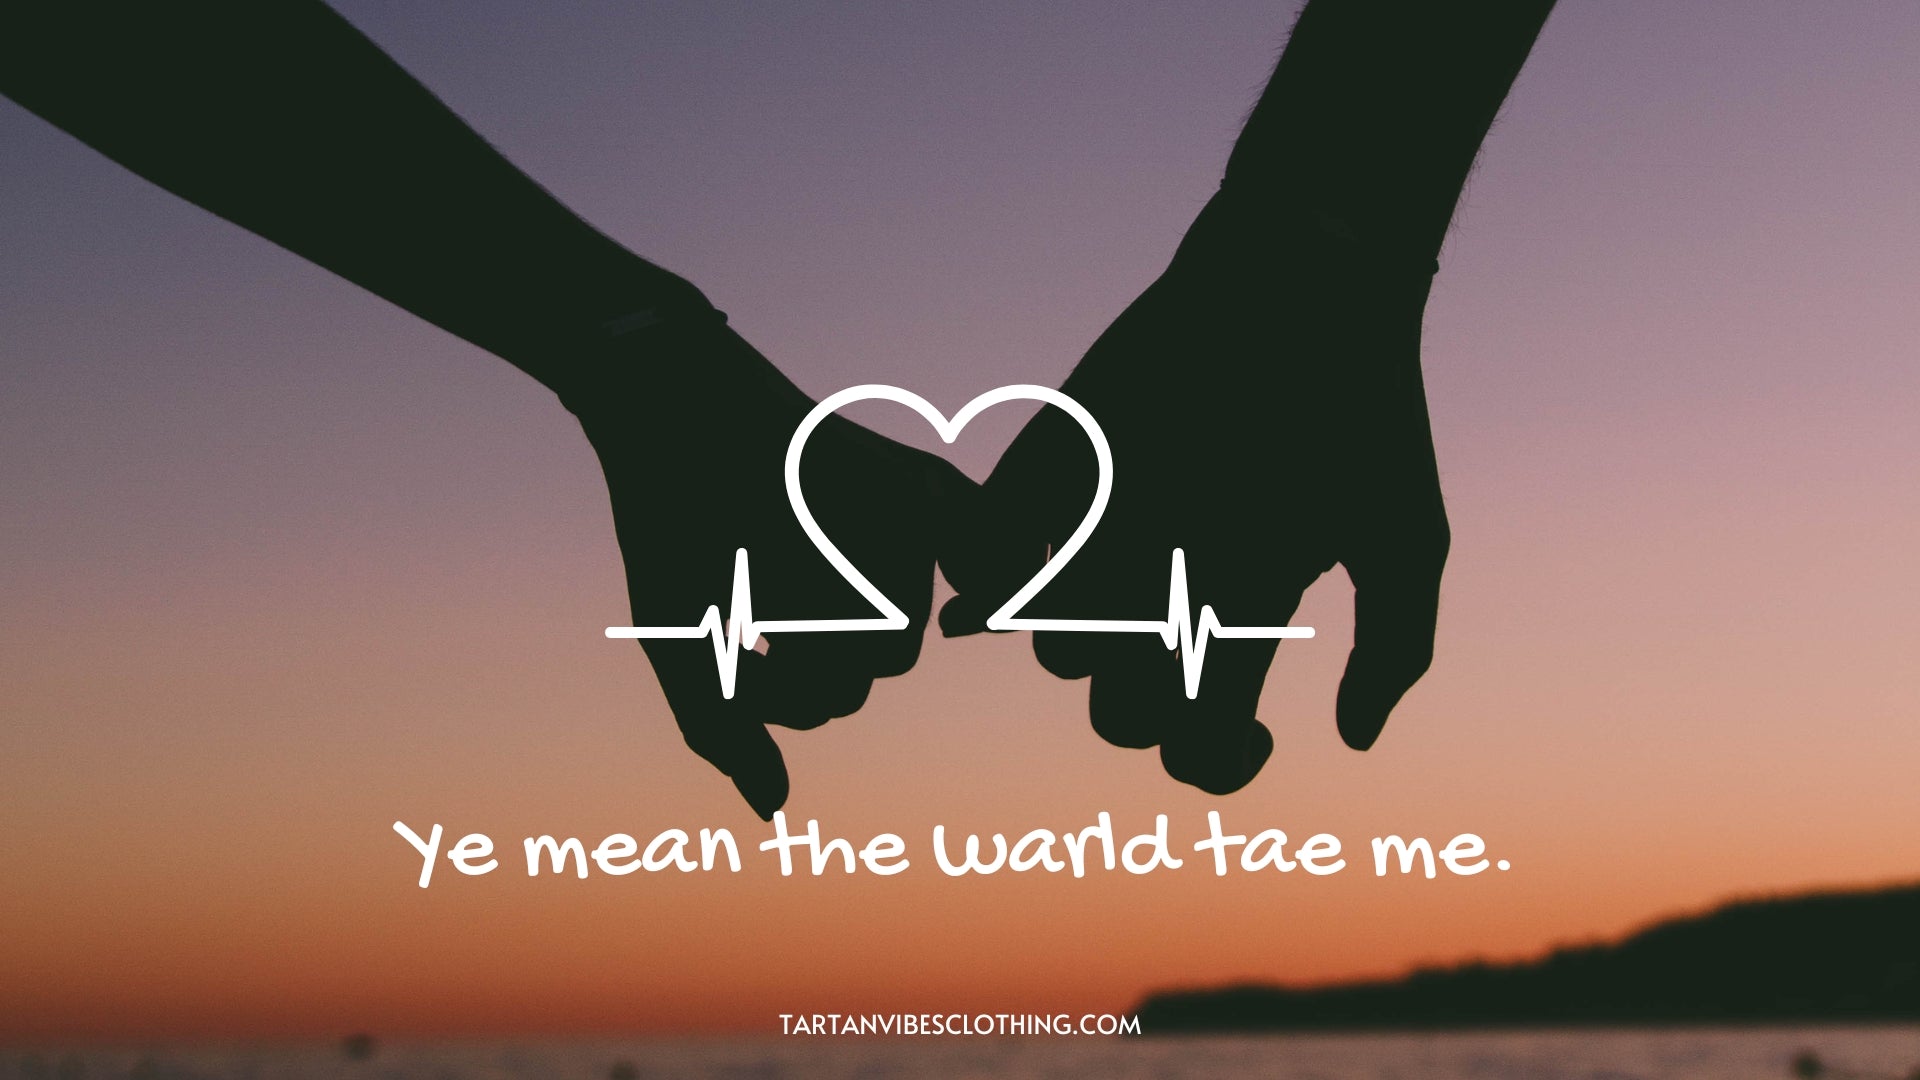 Ye mean the warld tae me - How to say i love you in irish